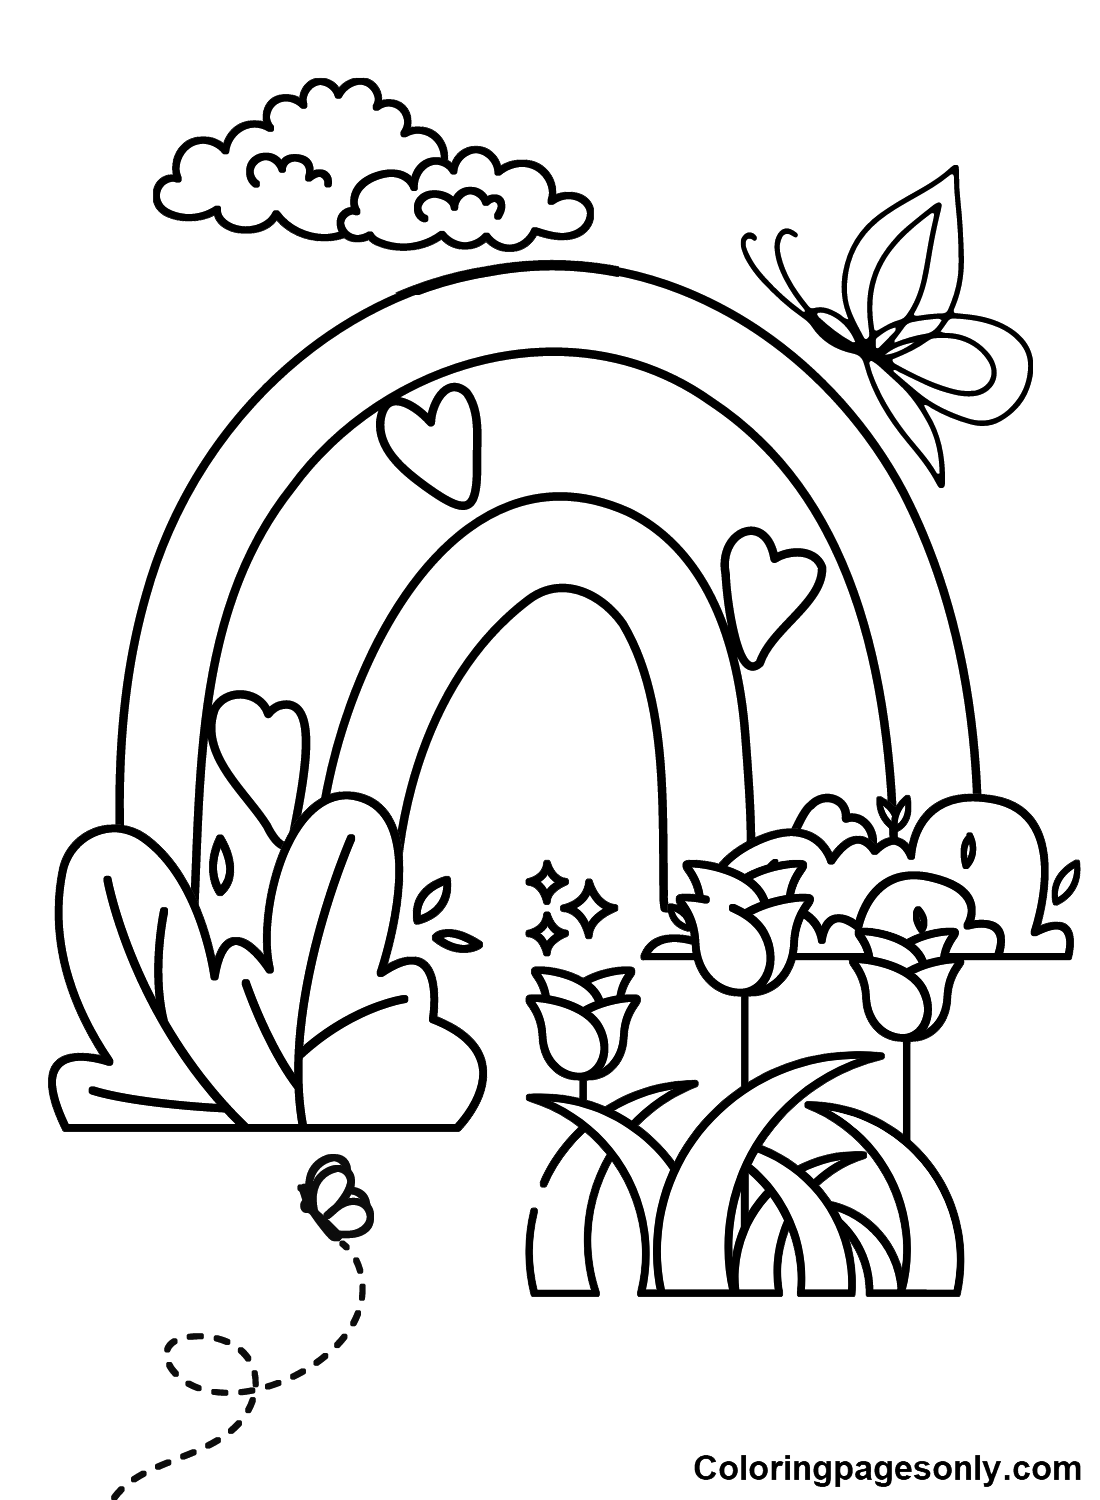 First Day of Spring Images Coloring Page